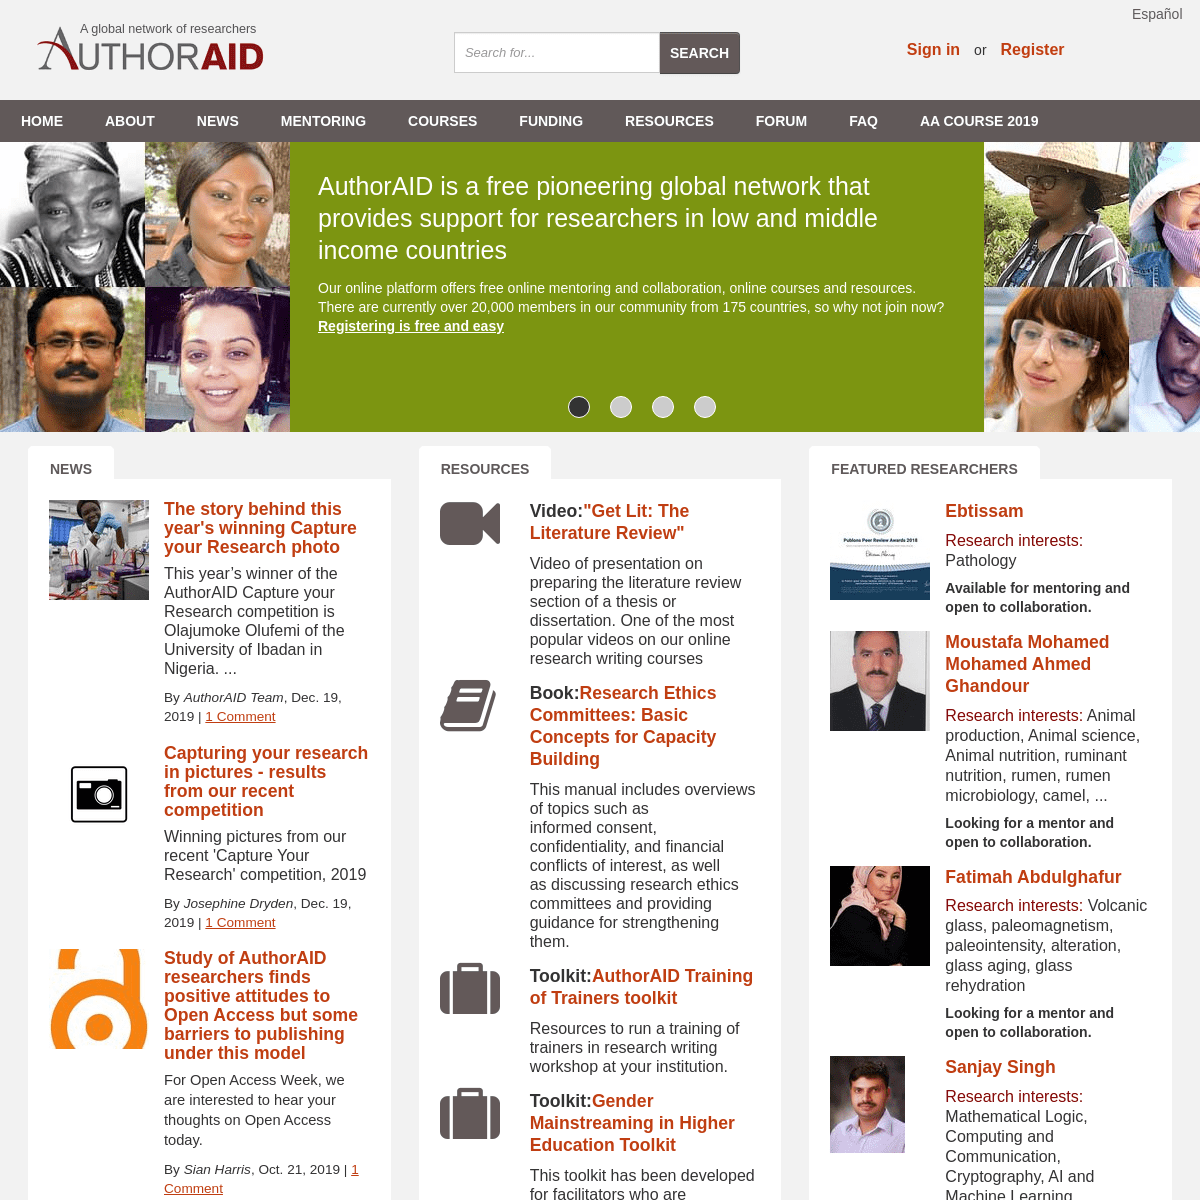 A complete backup of authoraid.info